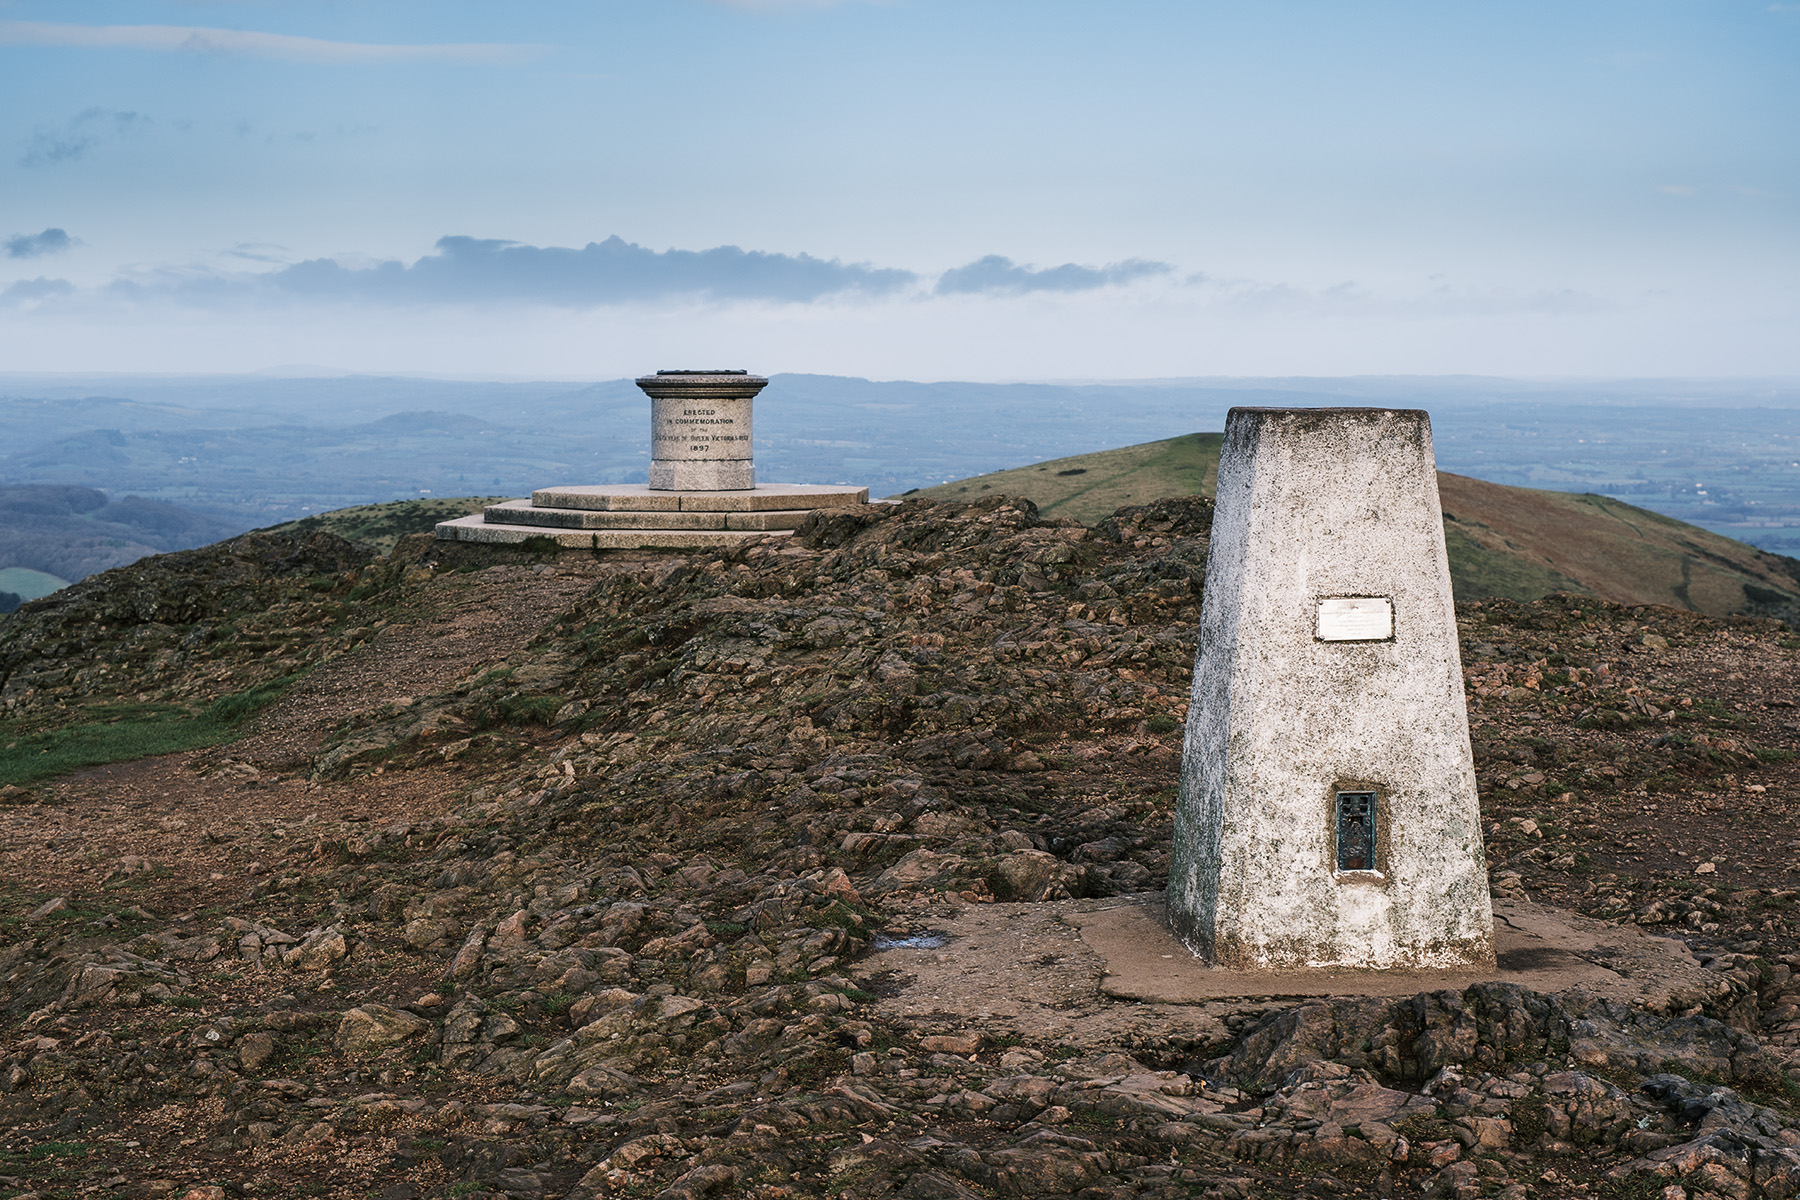 Trig point and direction guide